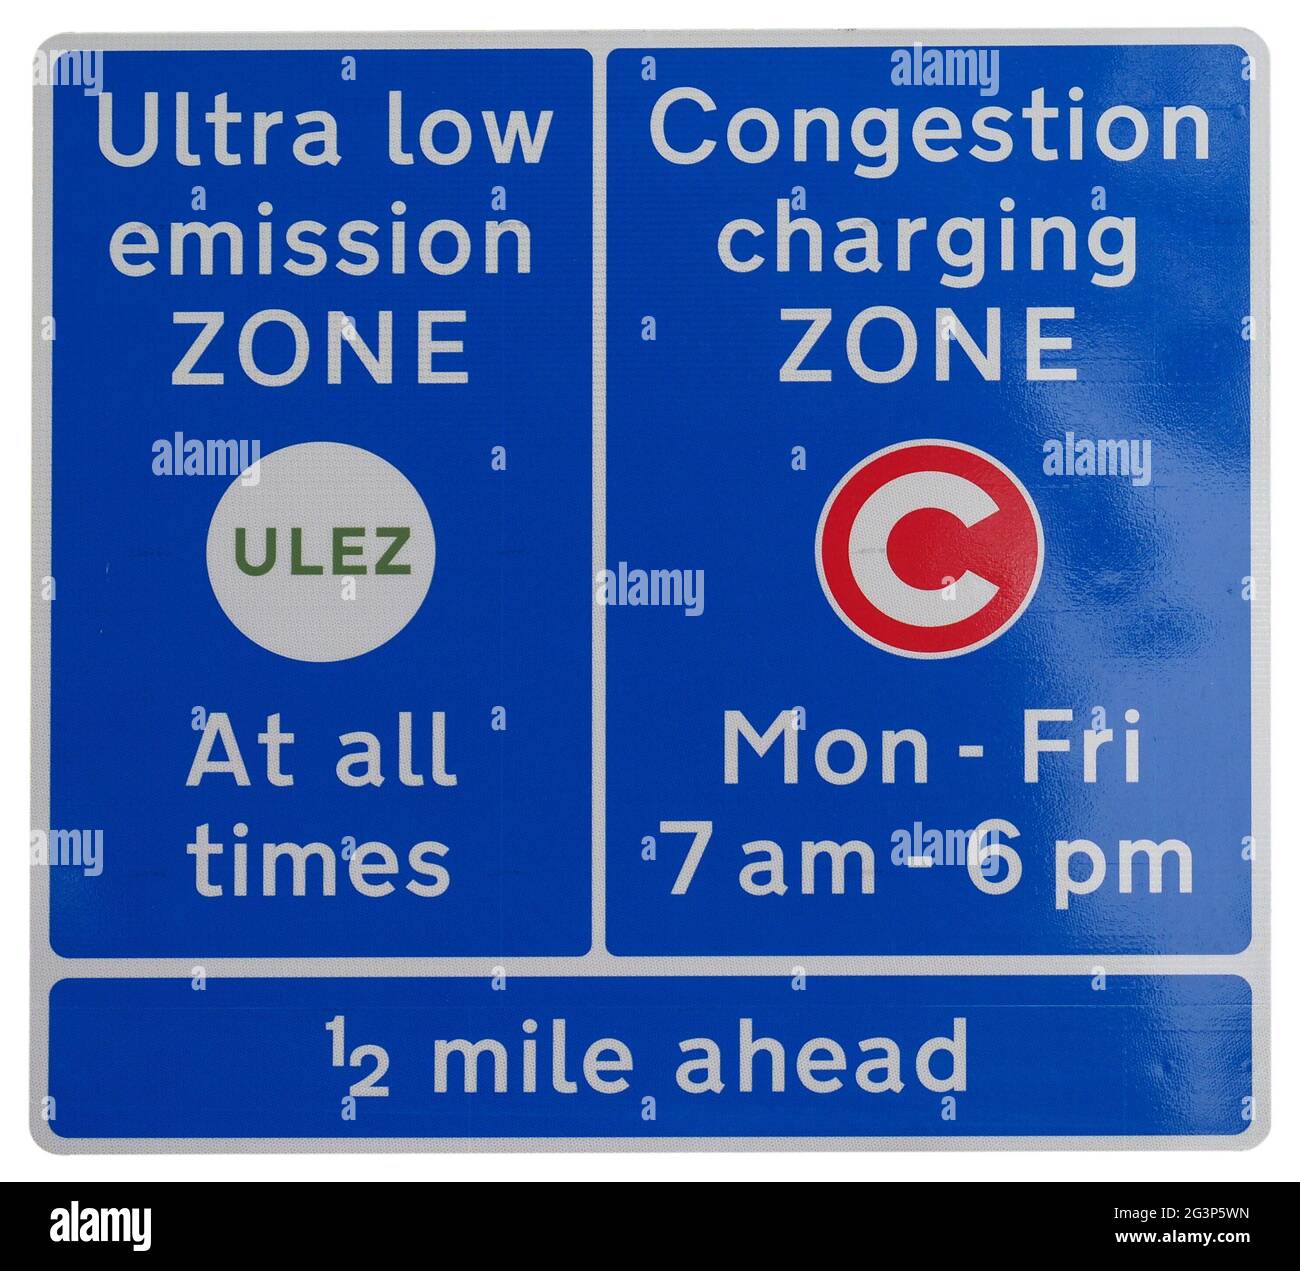 ULEZ (Ultra low emission zone) and C (Congestion charging zone) signs in London isolated over white Stock Photo